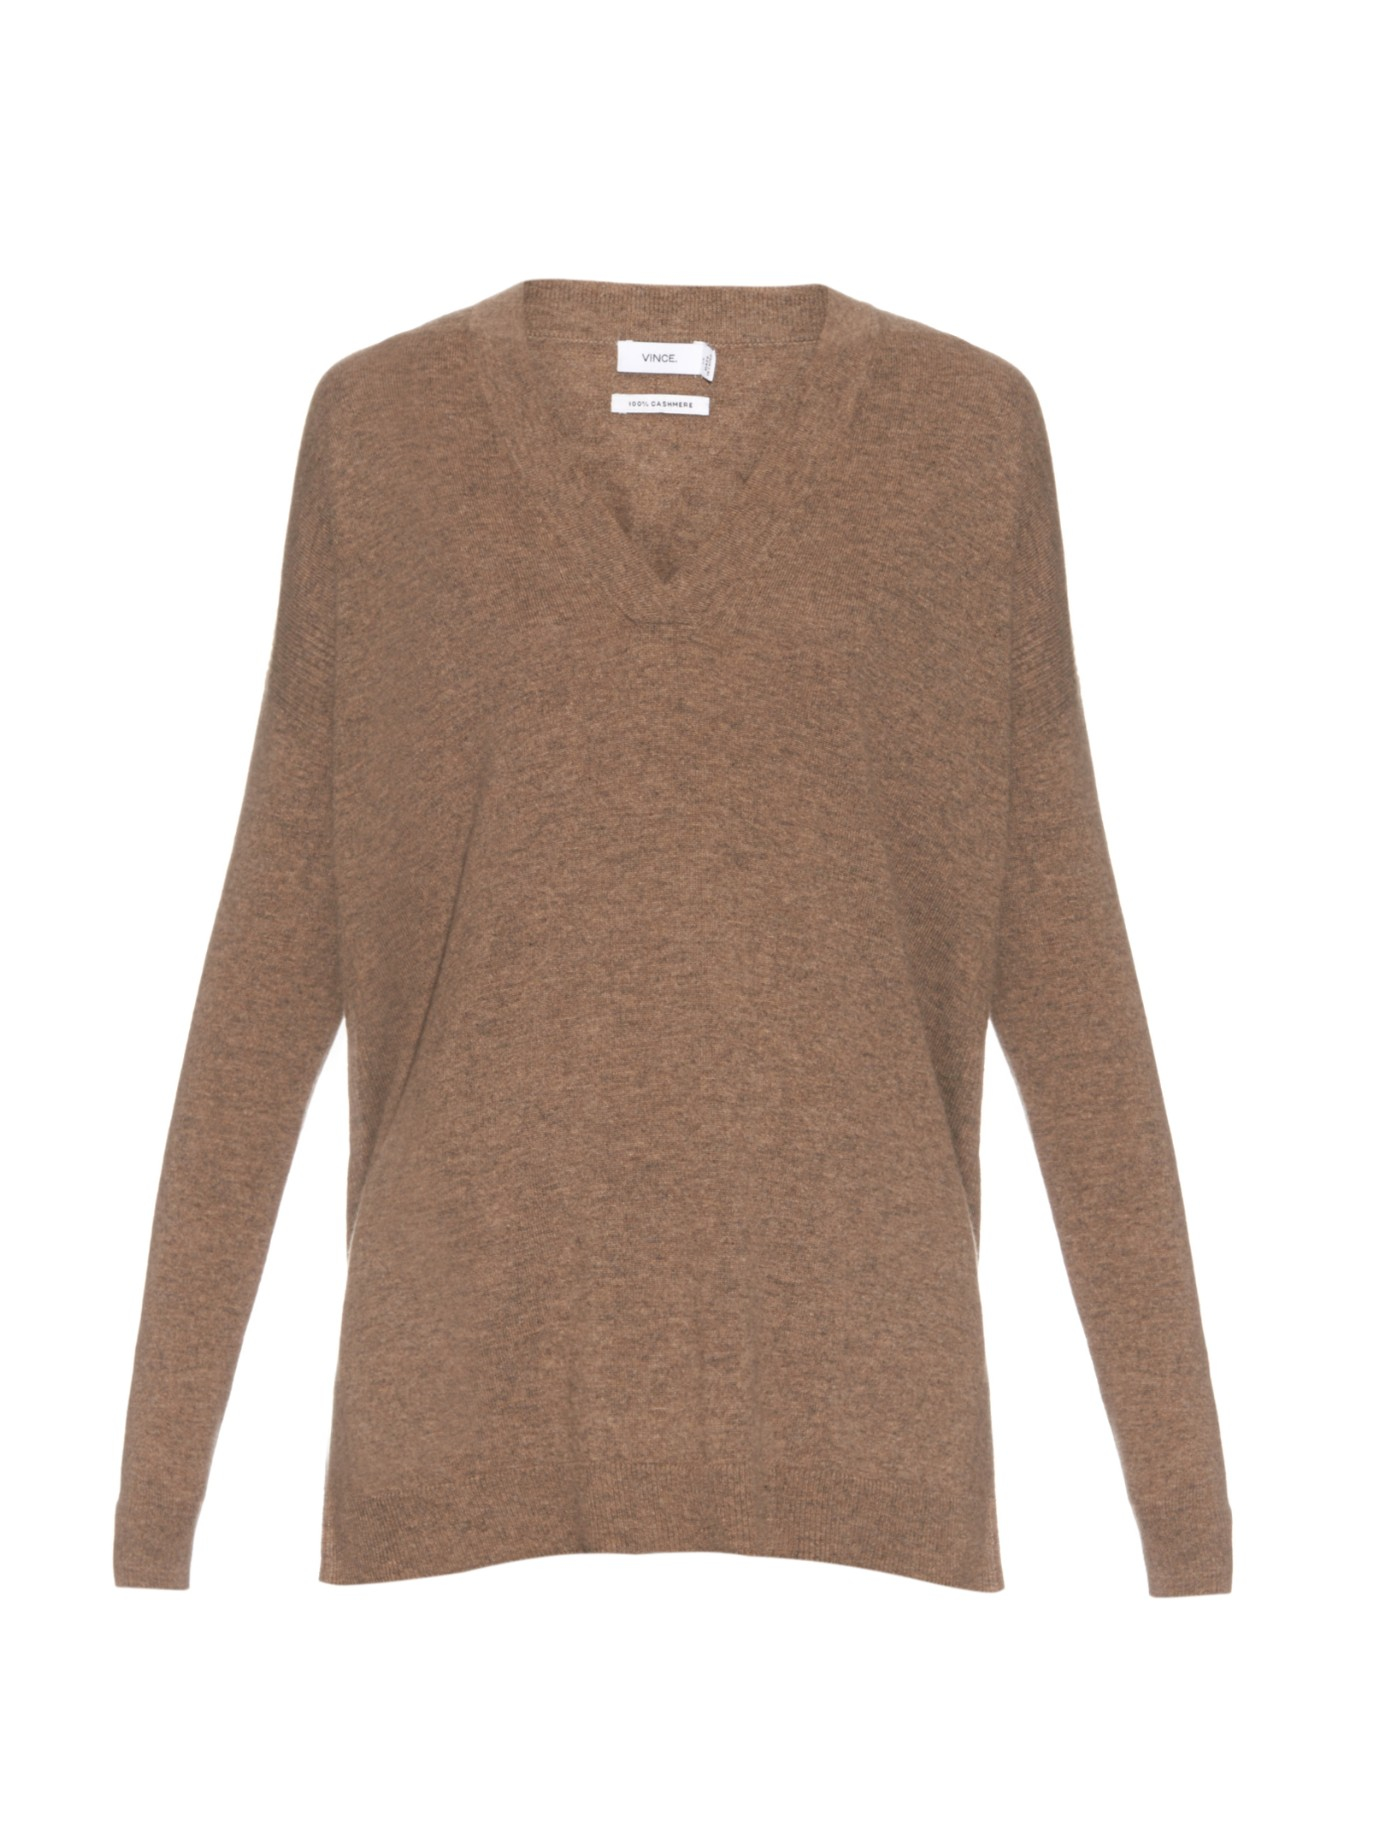 Vince V-neck Ribbed-knit Cashmere Sweater in Brown | Lyst